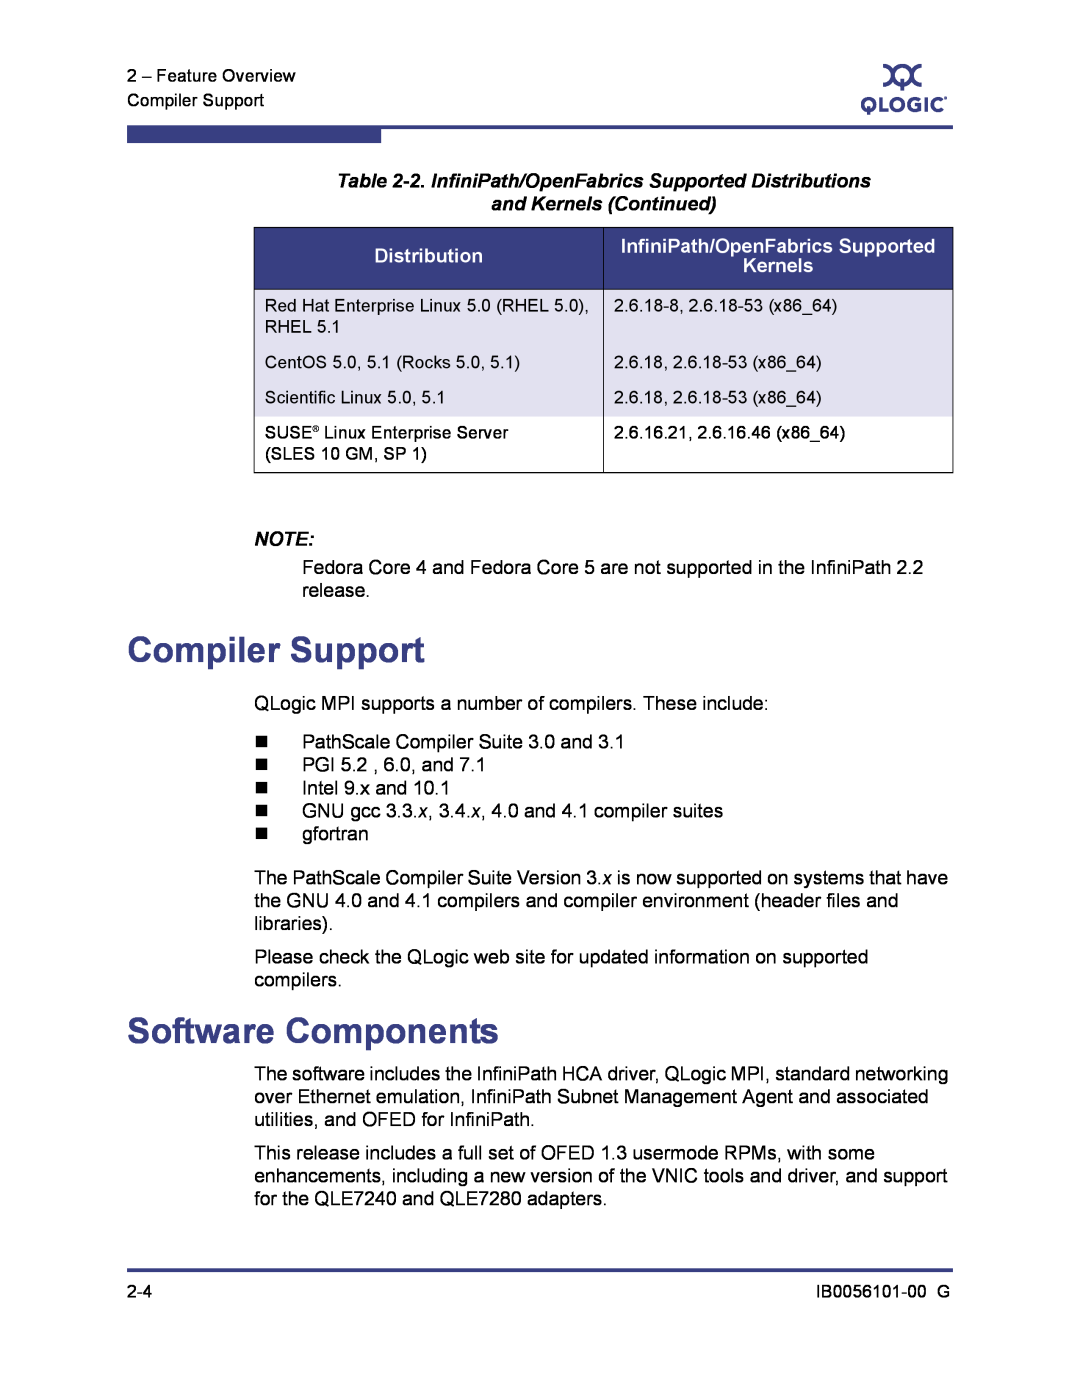 Q-Logic IB0056101-00 G Compiler Support, Software Components, 2. InfiniPath/OpenFabrics Supported Distributions, Kernels 